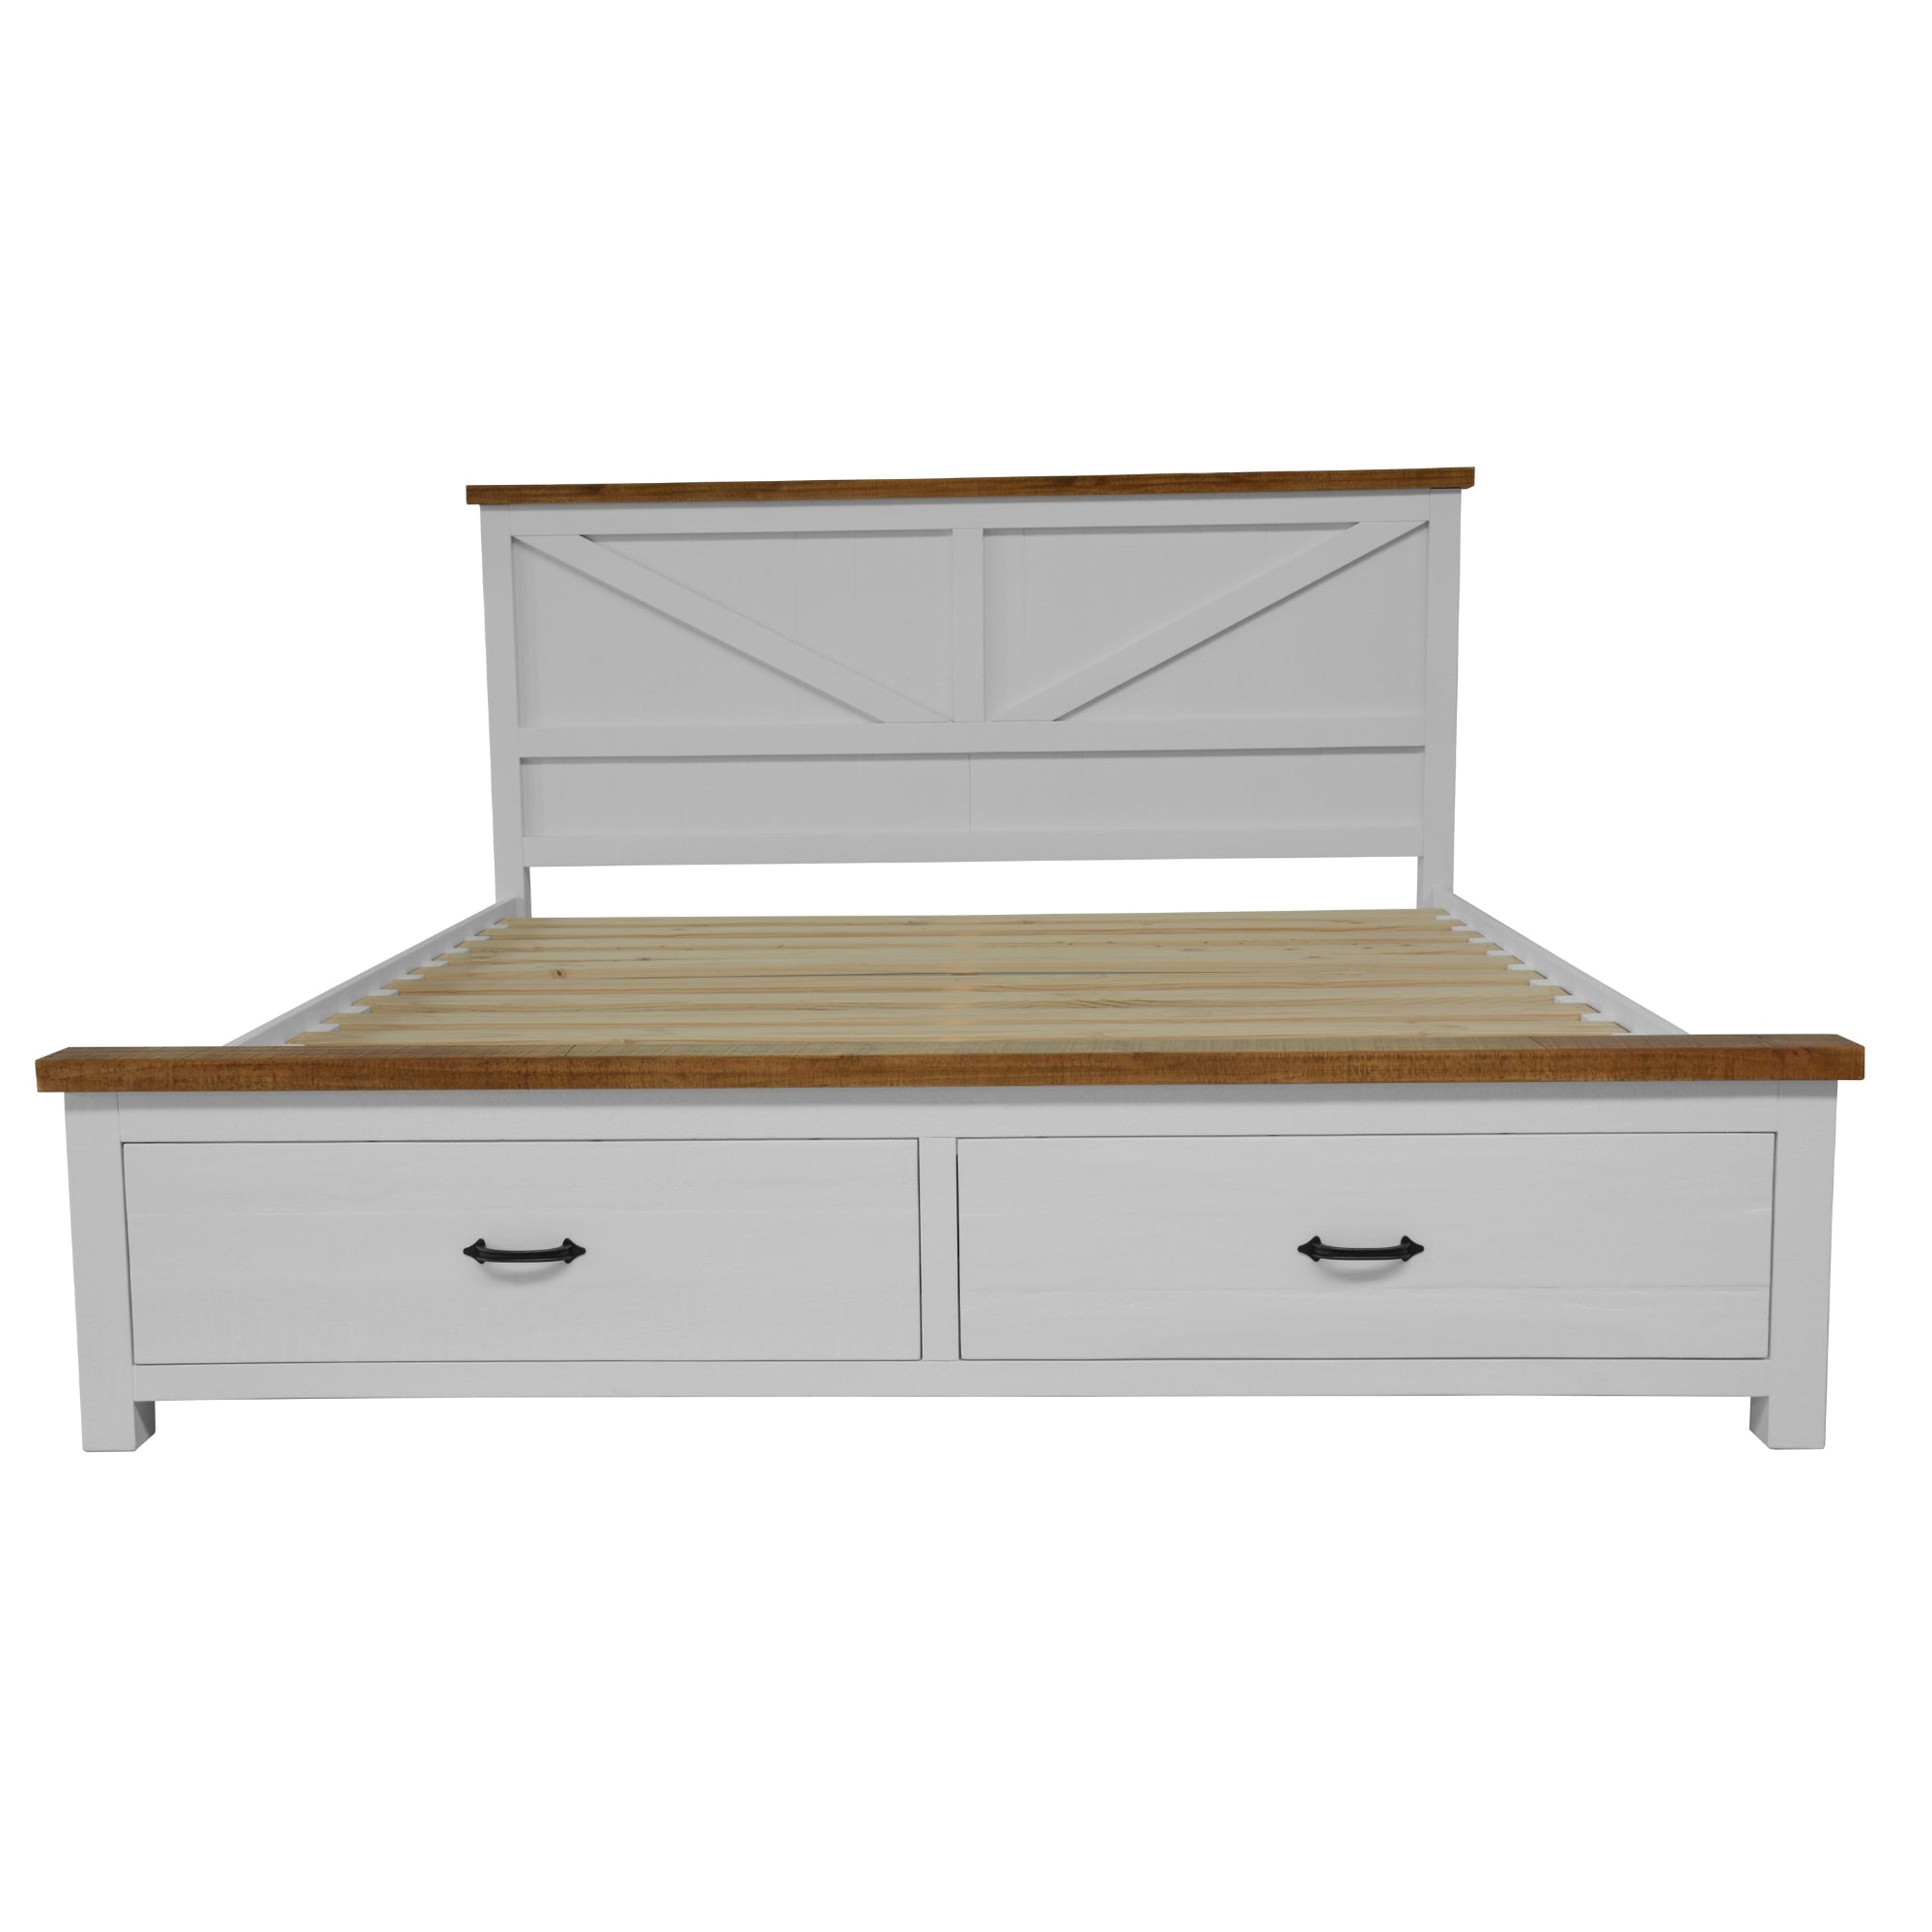 Hampton Style Queen Bed Frame with Storage Drawers, Pine Wood